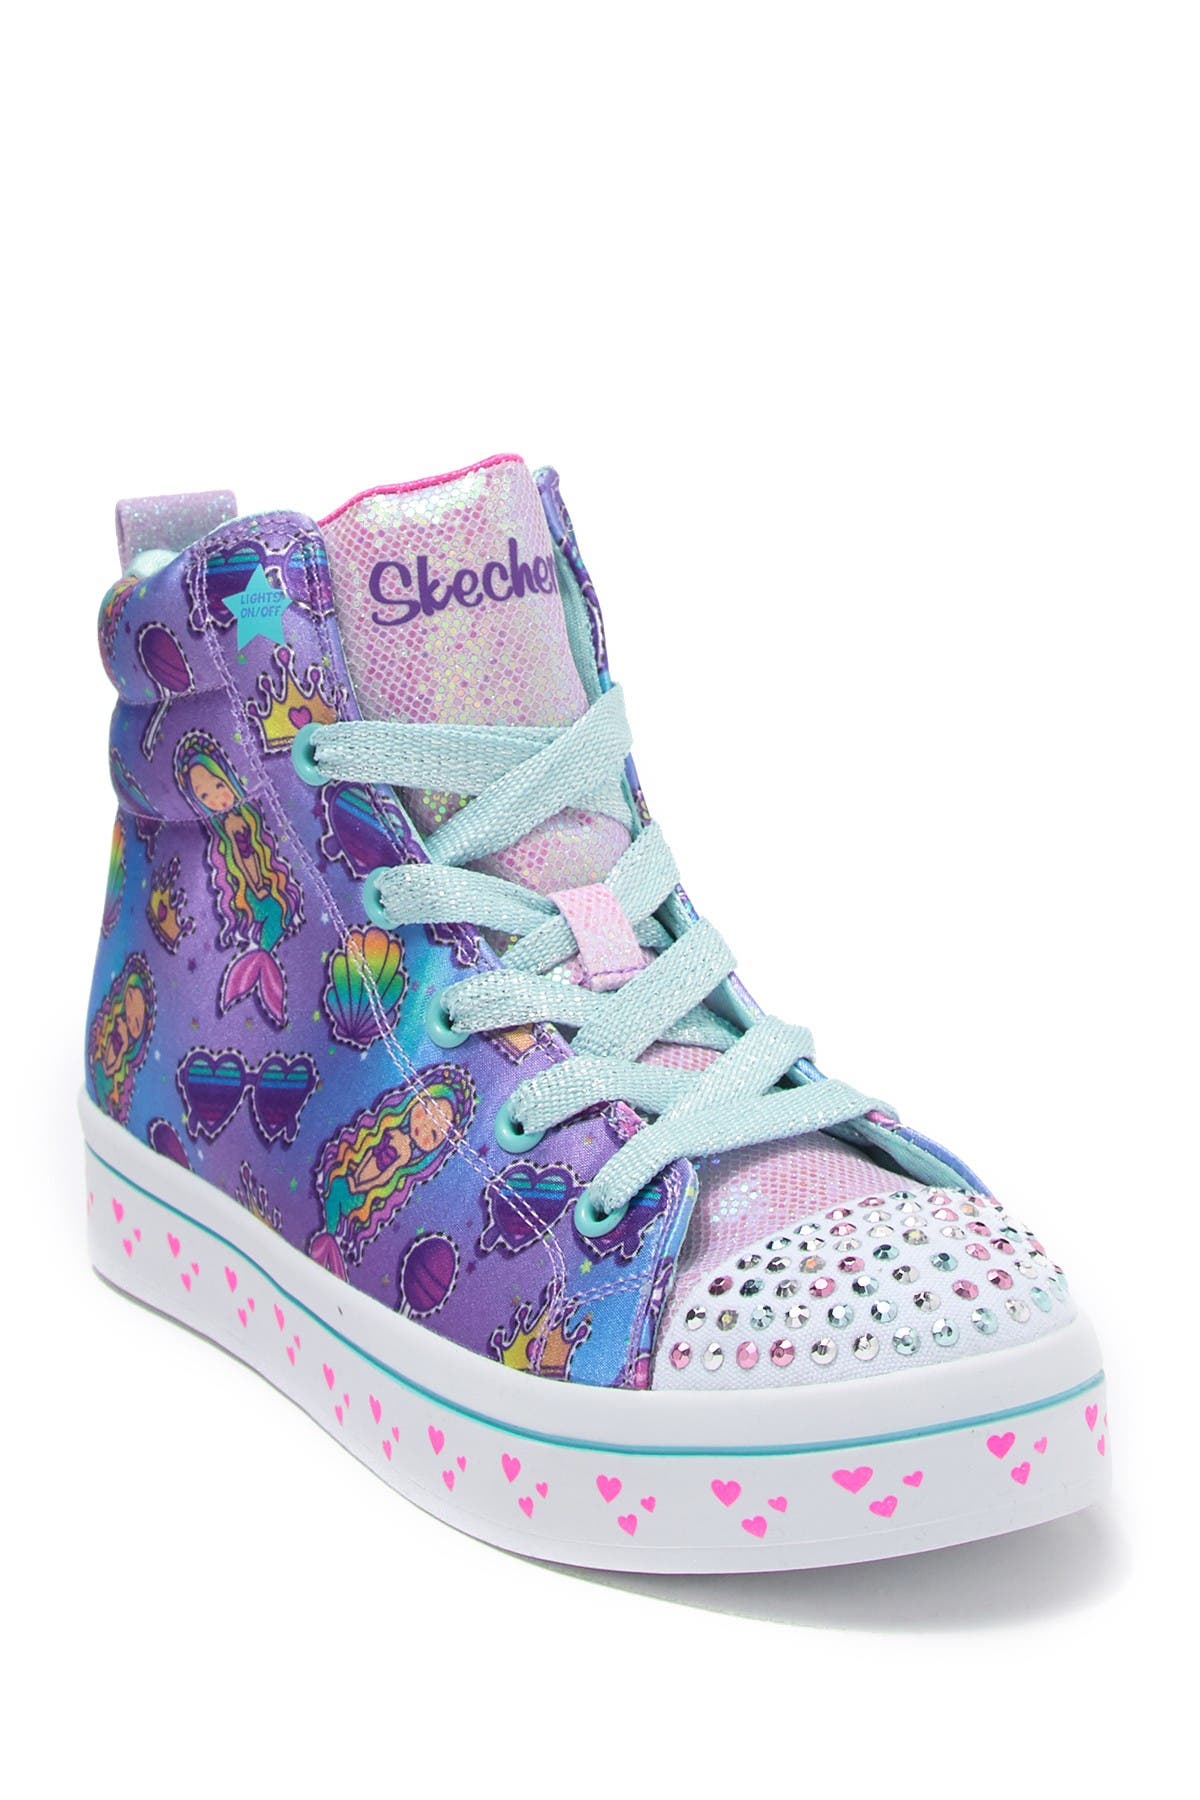 mermaid light up shoes